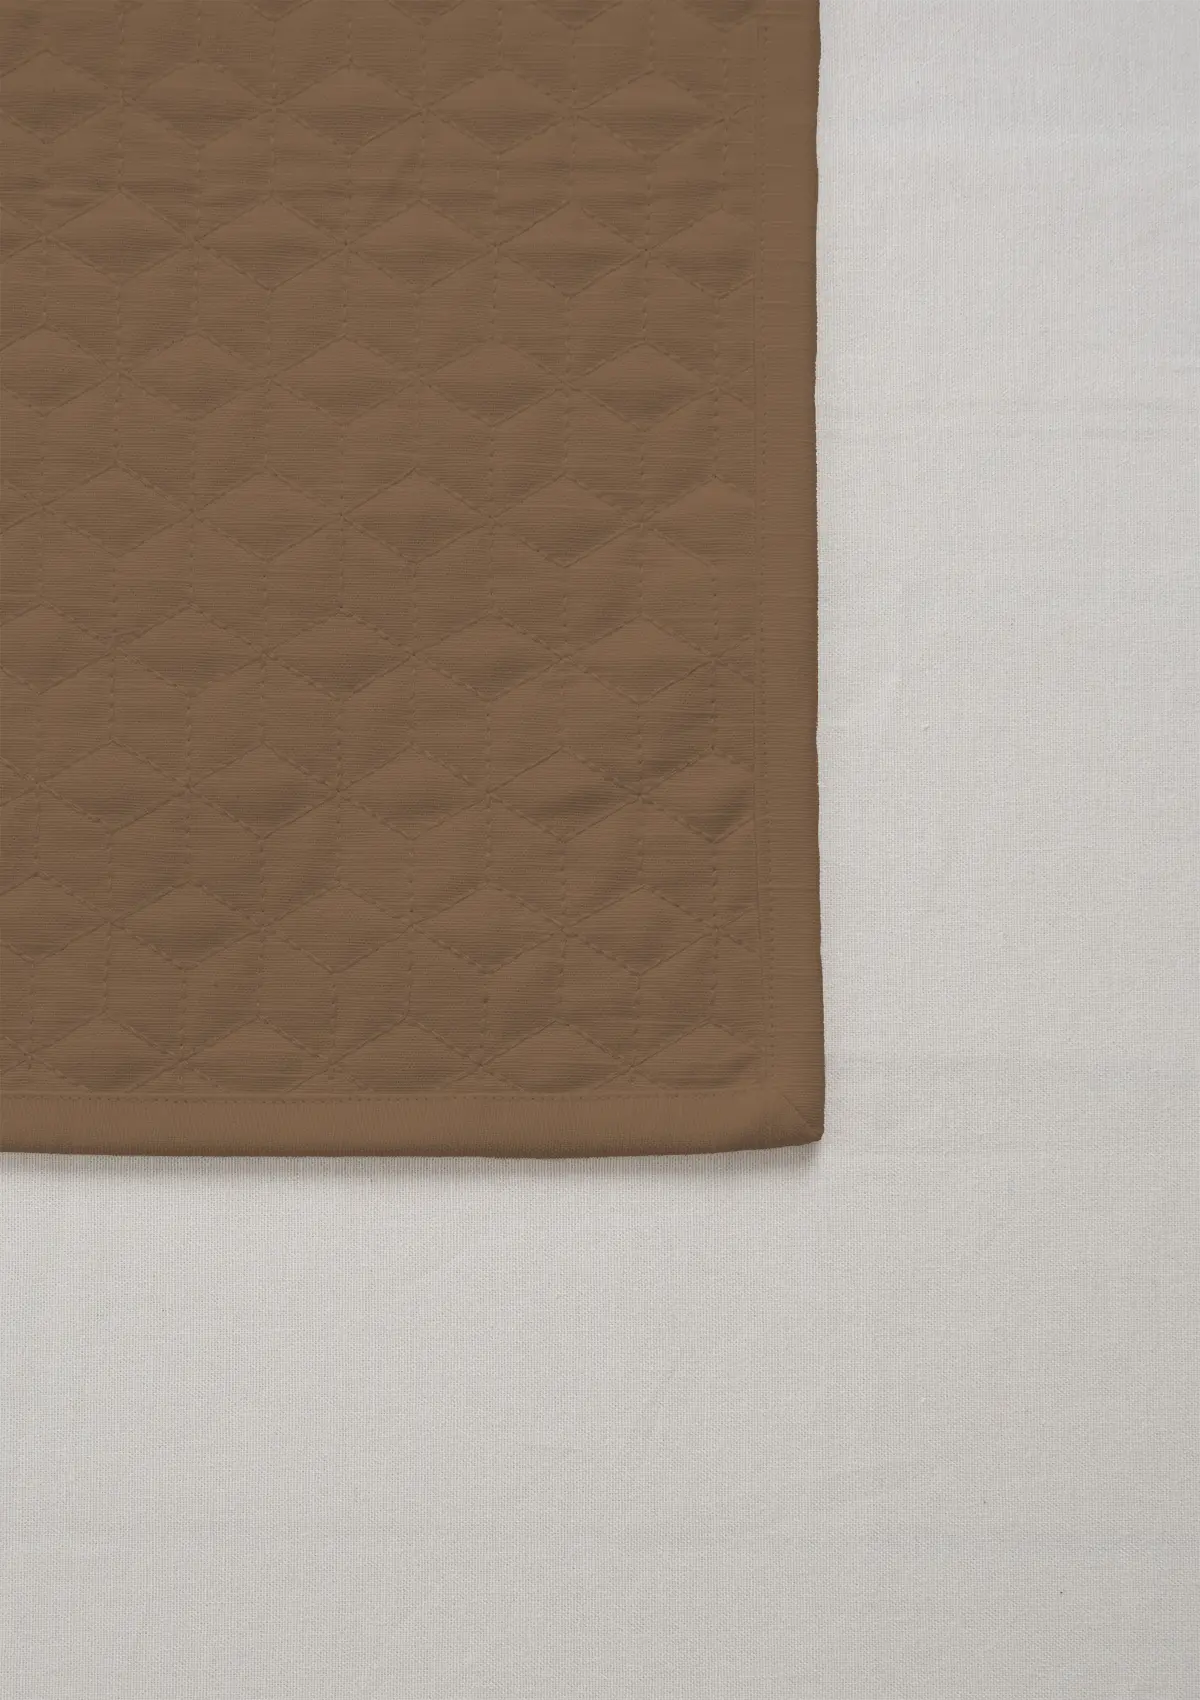 Solid chocolate brown 100% cotton quilted placemat for 4 seater or 6 seater dining